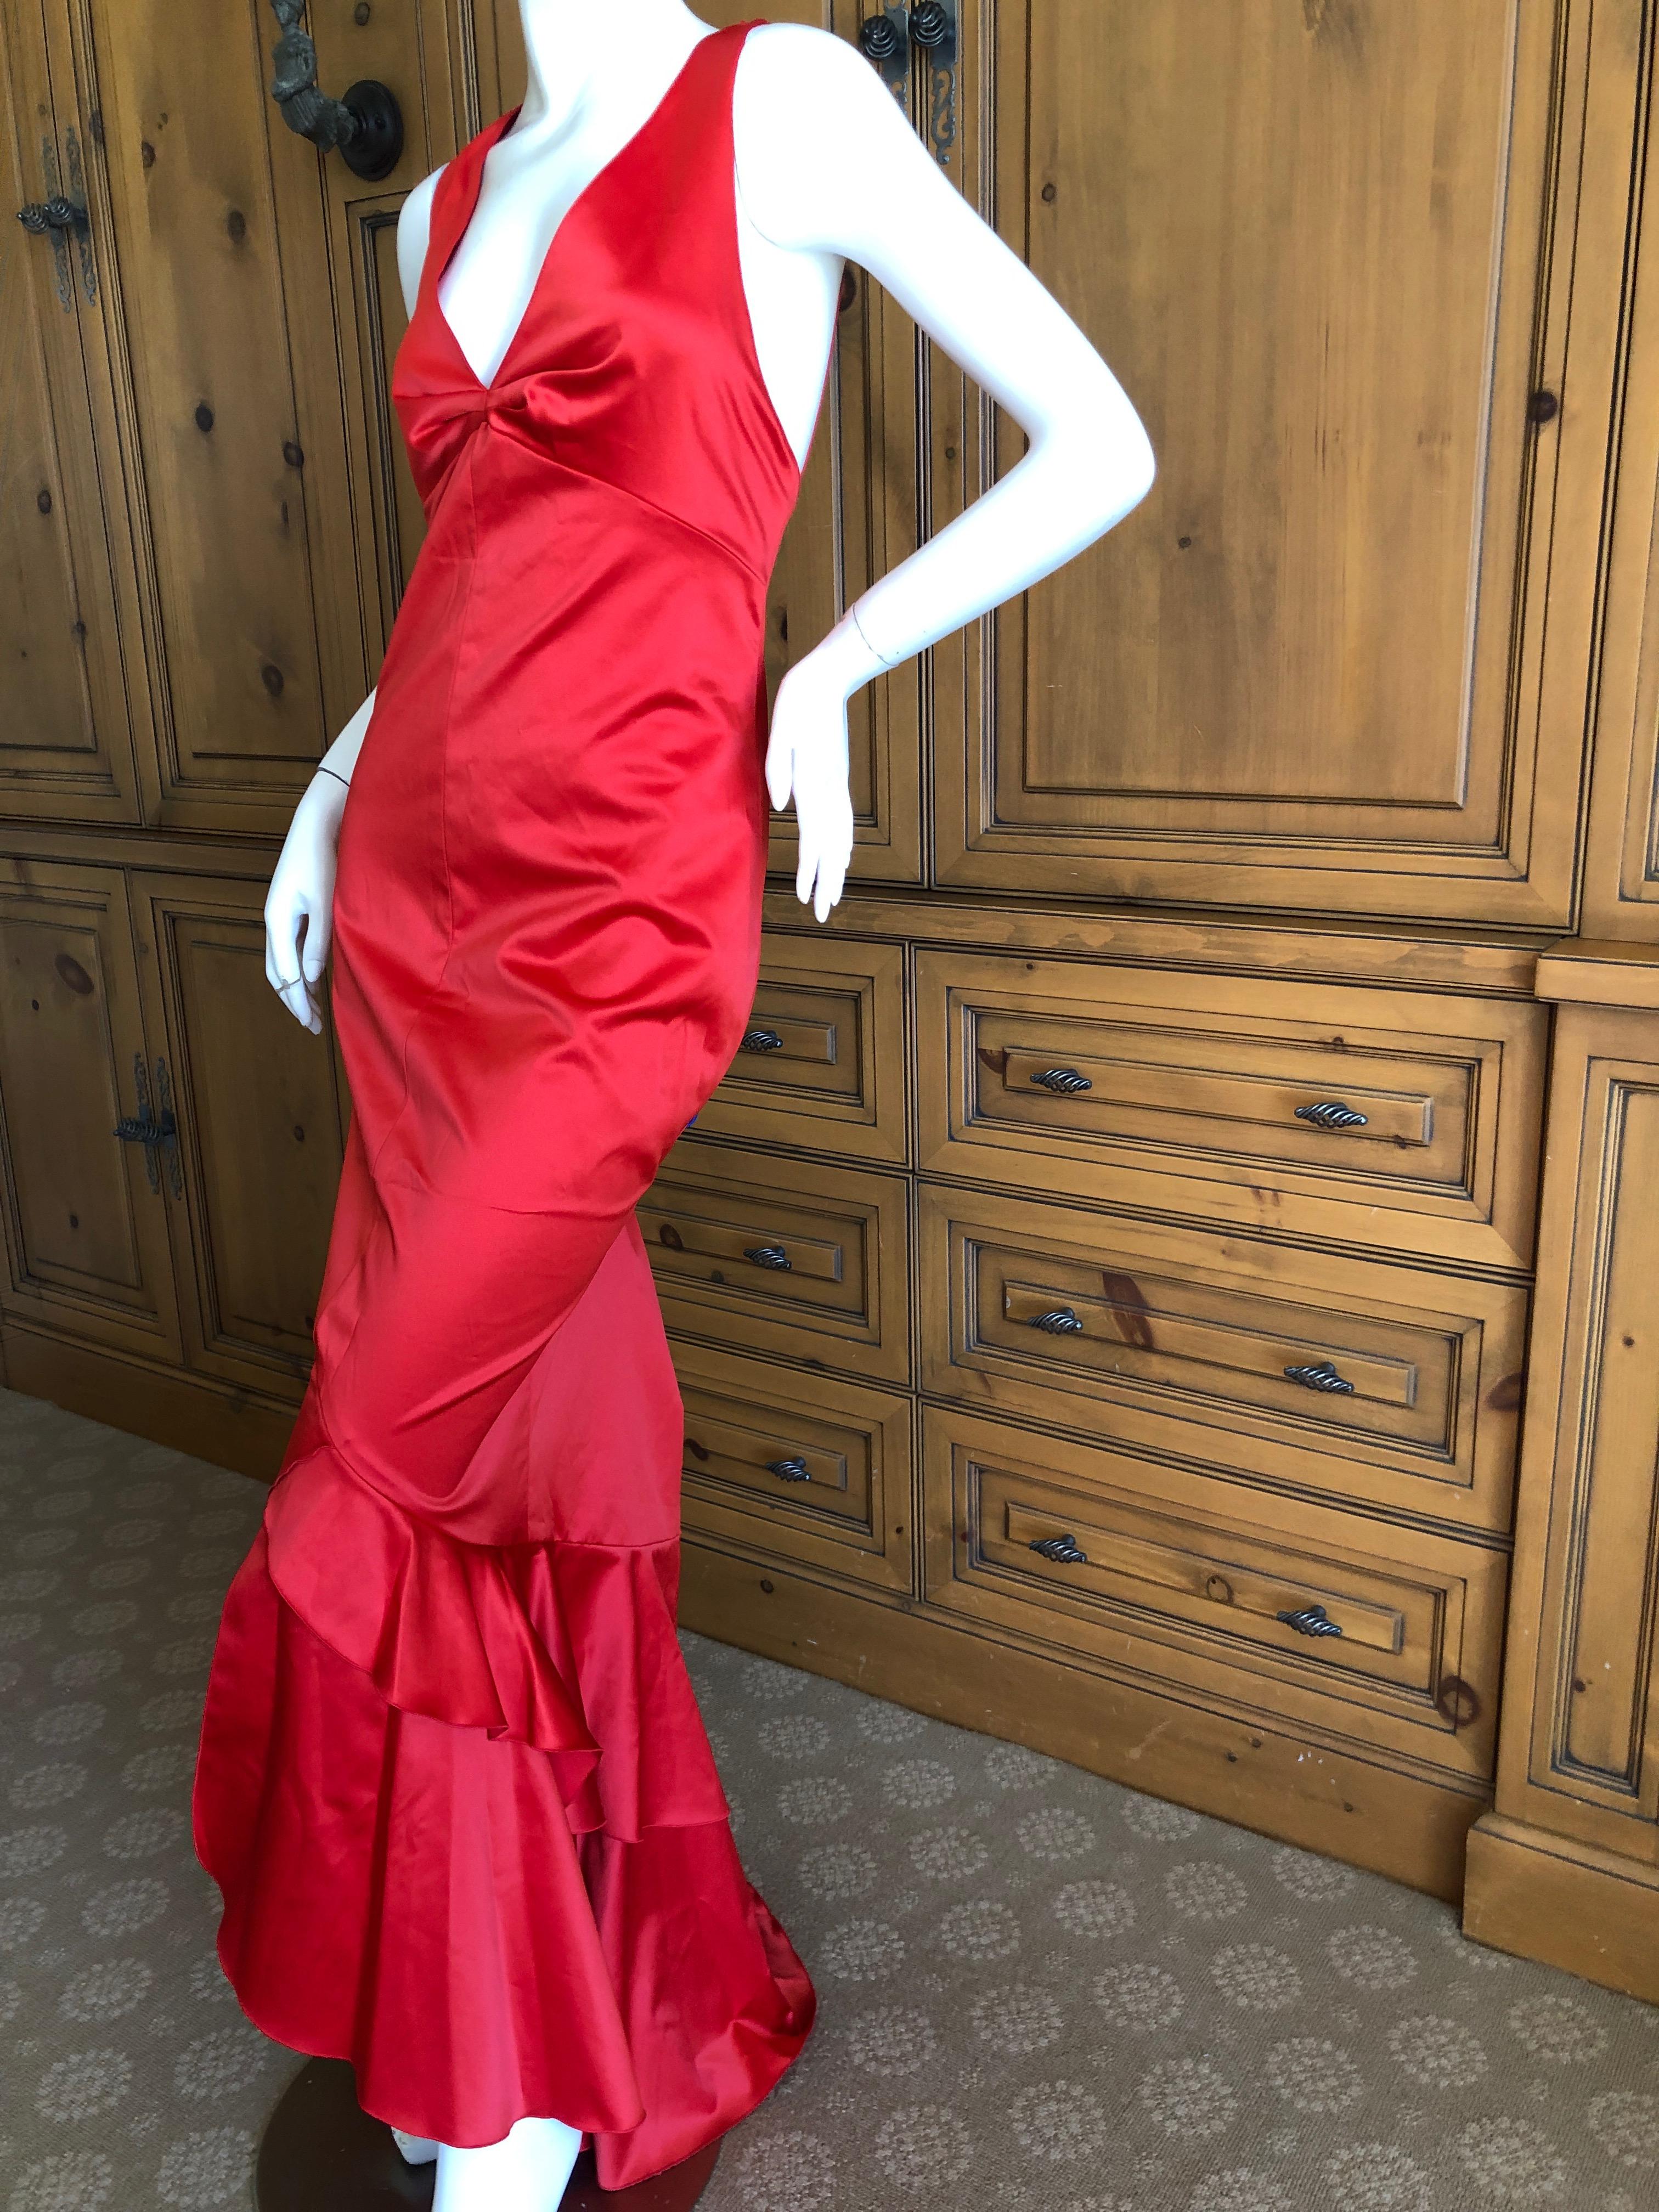 Karl Lagerfeld 1980's Red Evening Dress with Matching Jacket Lagerfeld Gallery.
In 1984, fresh from his success as being named the designer of Chanel (1983), Karl Lagerfeld put out his first signature collections, one at a very high price level, and